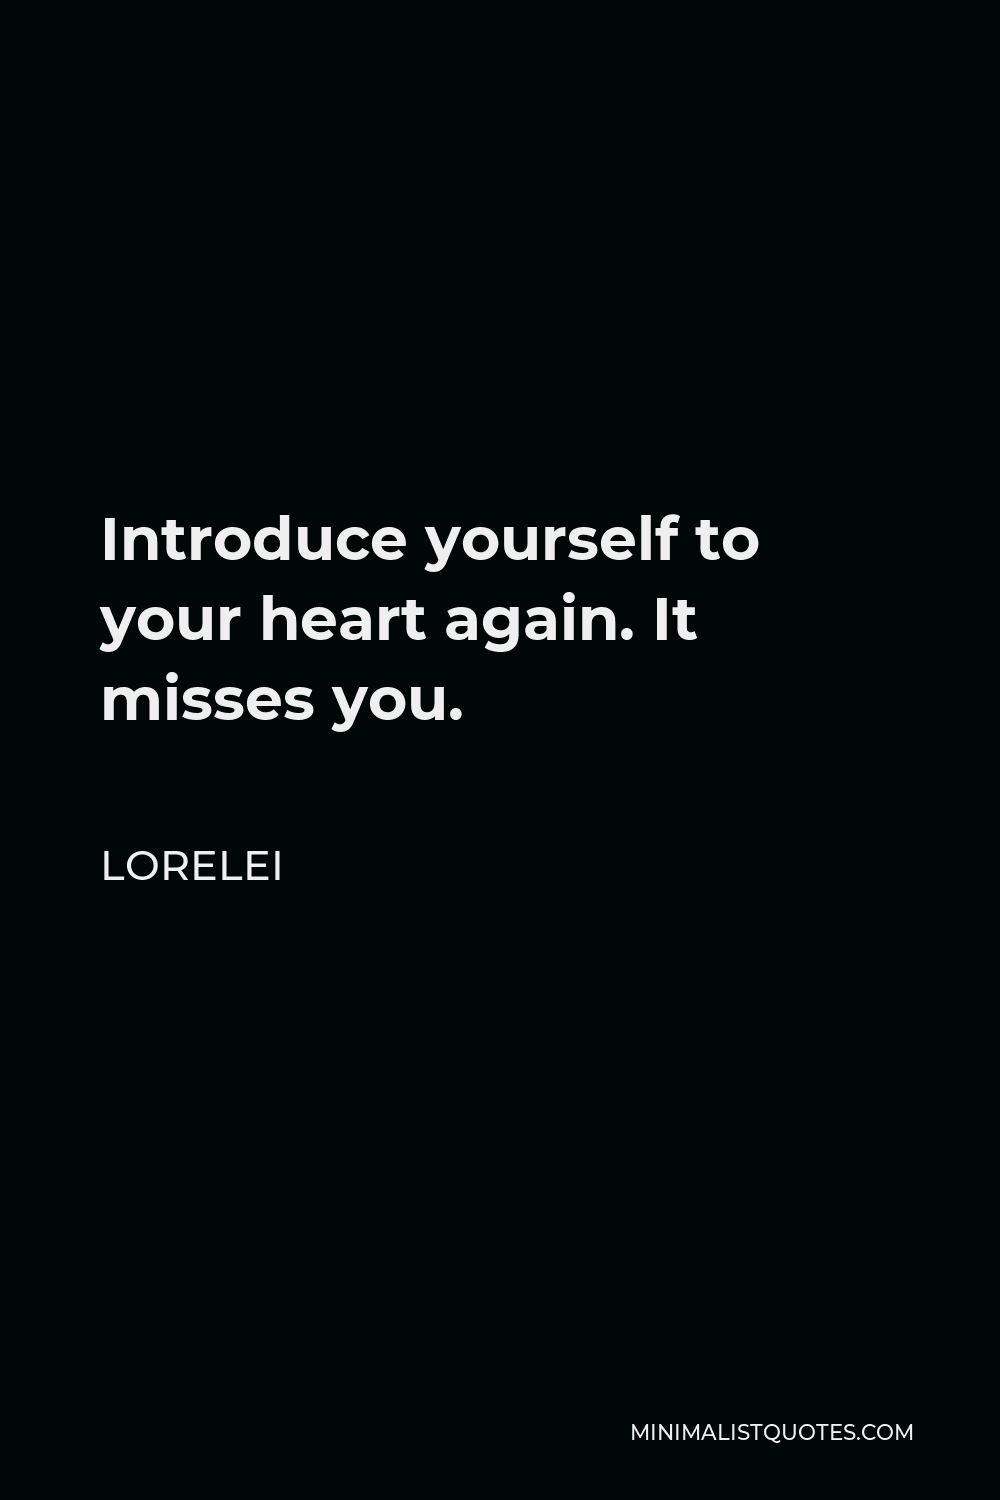 Lorelei Quote - Introduce yourself to your heart again. It misses you.